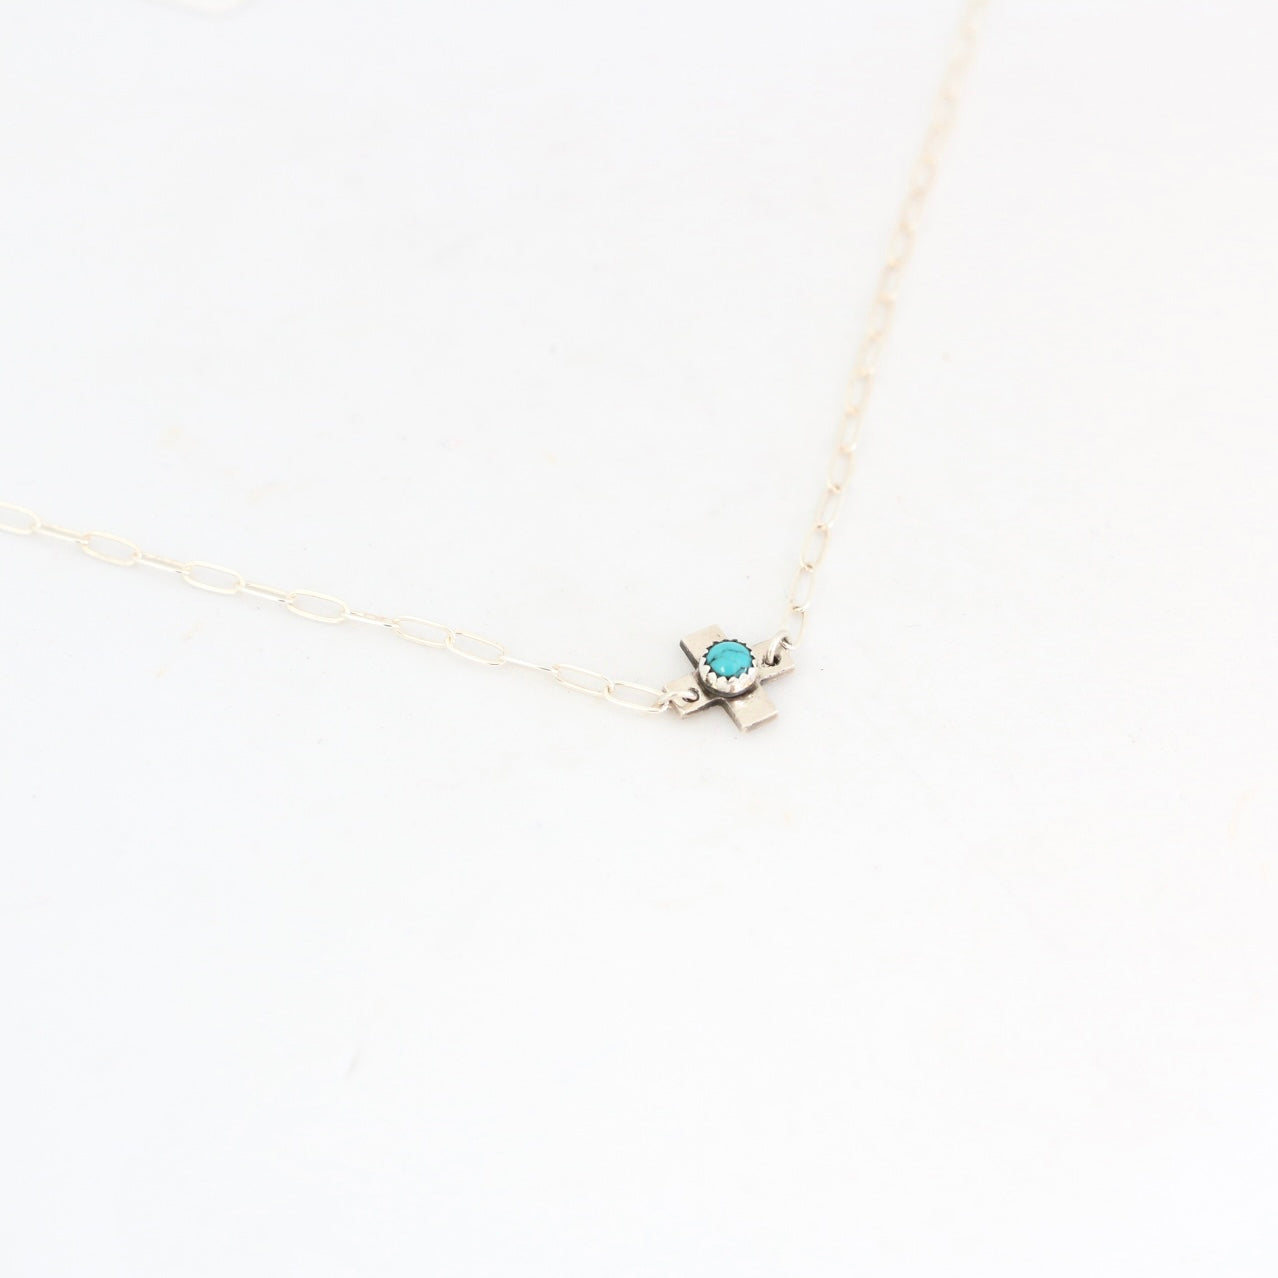 Dainty Kelly Cross with Turquoise Necklace Necklaces Richard Schmidt   